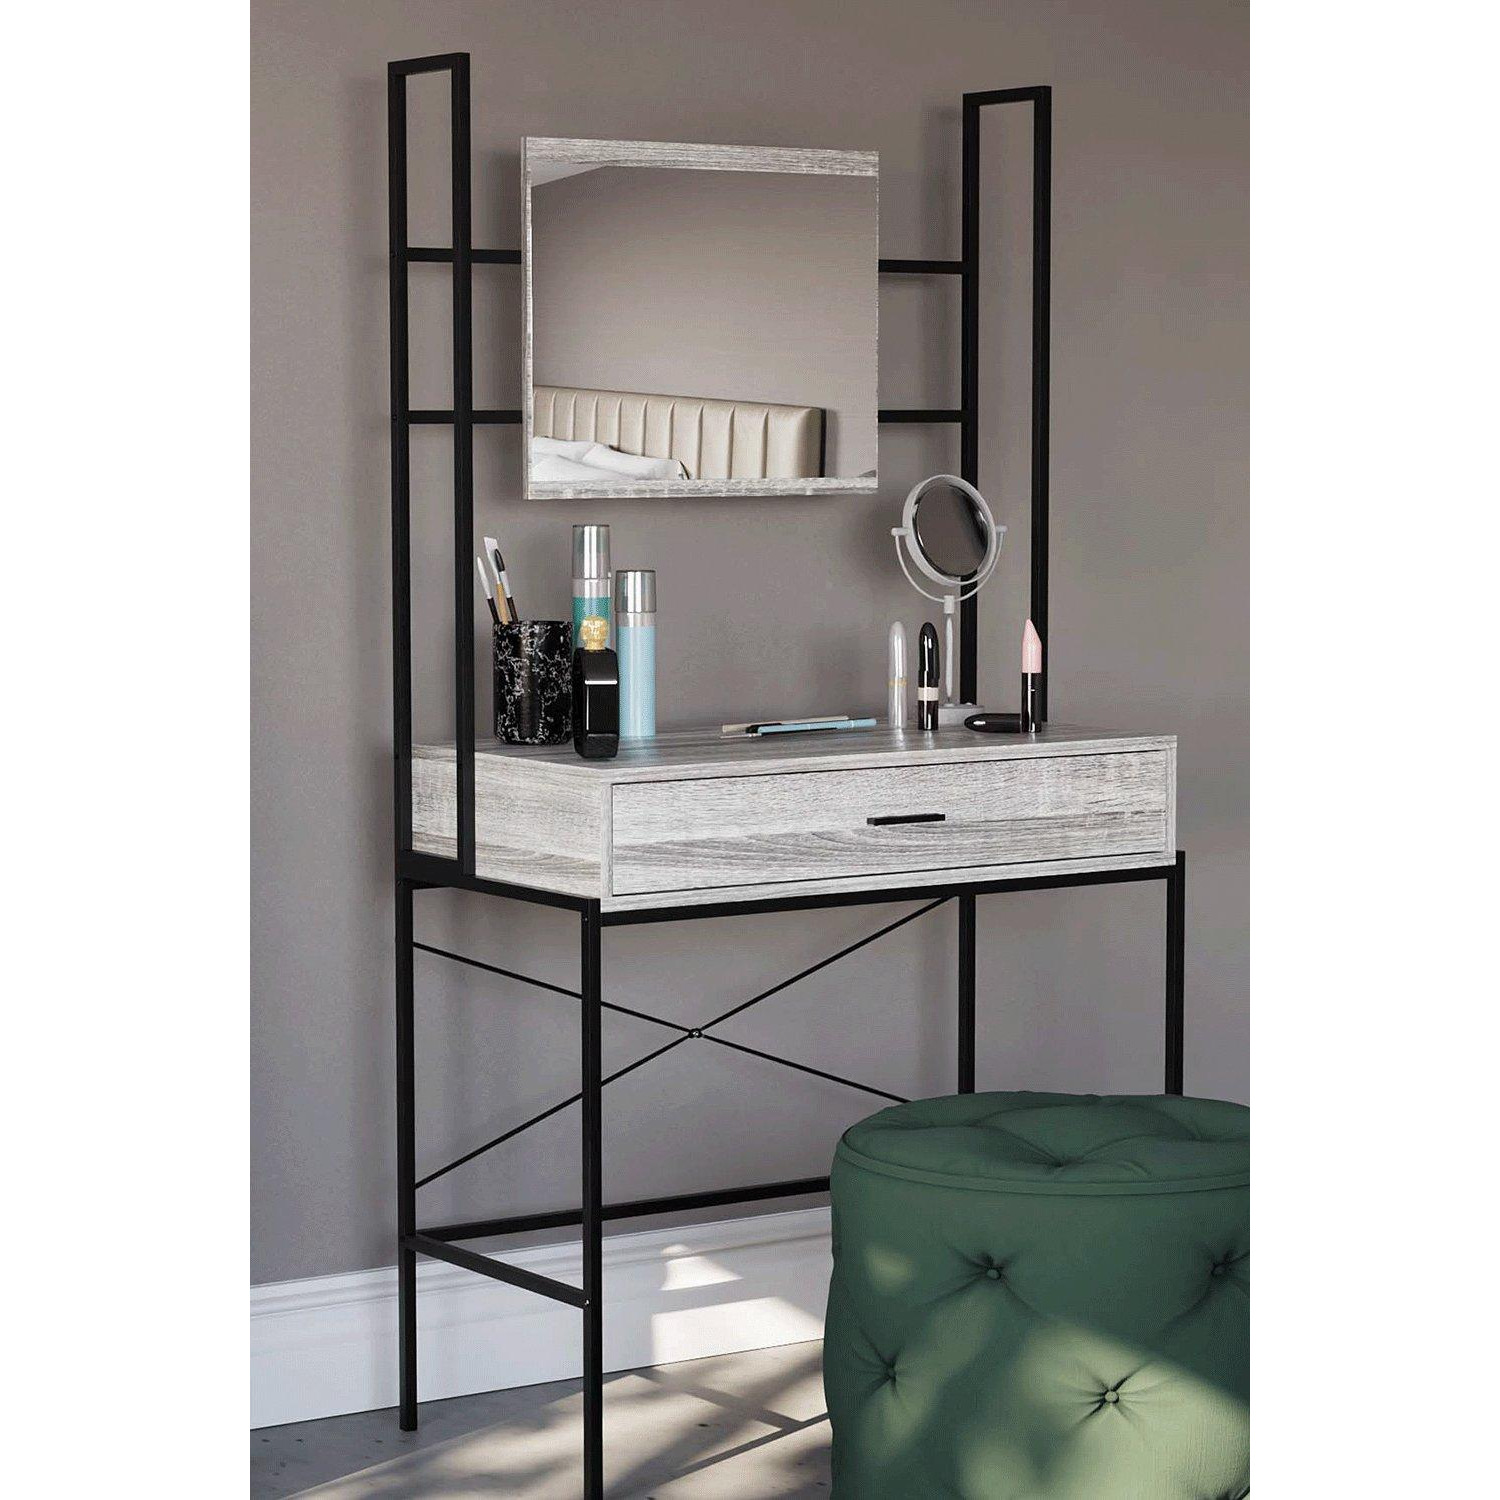 Vida Designs Brooklyn 1 Drawer Dressing Table with Built-in Mirror Storage - image 1